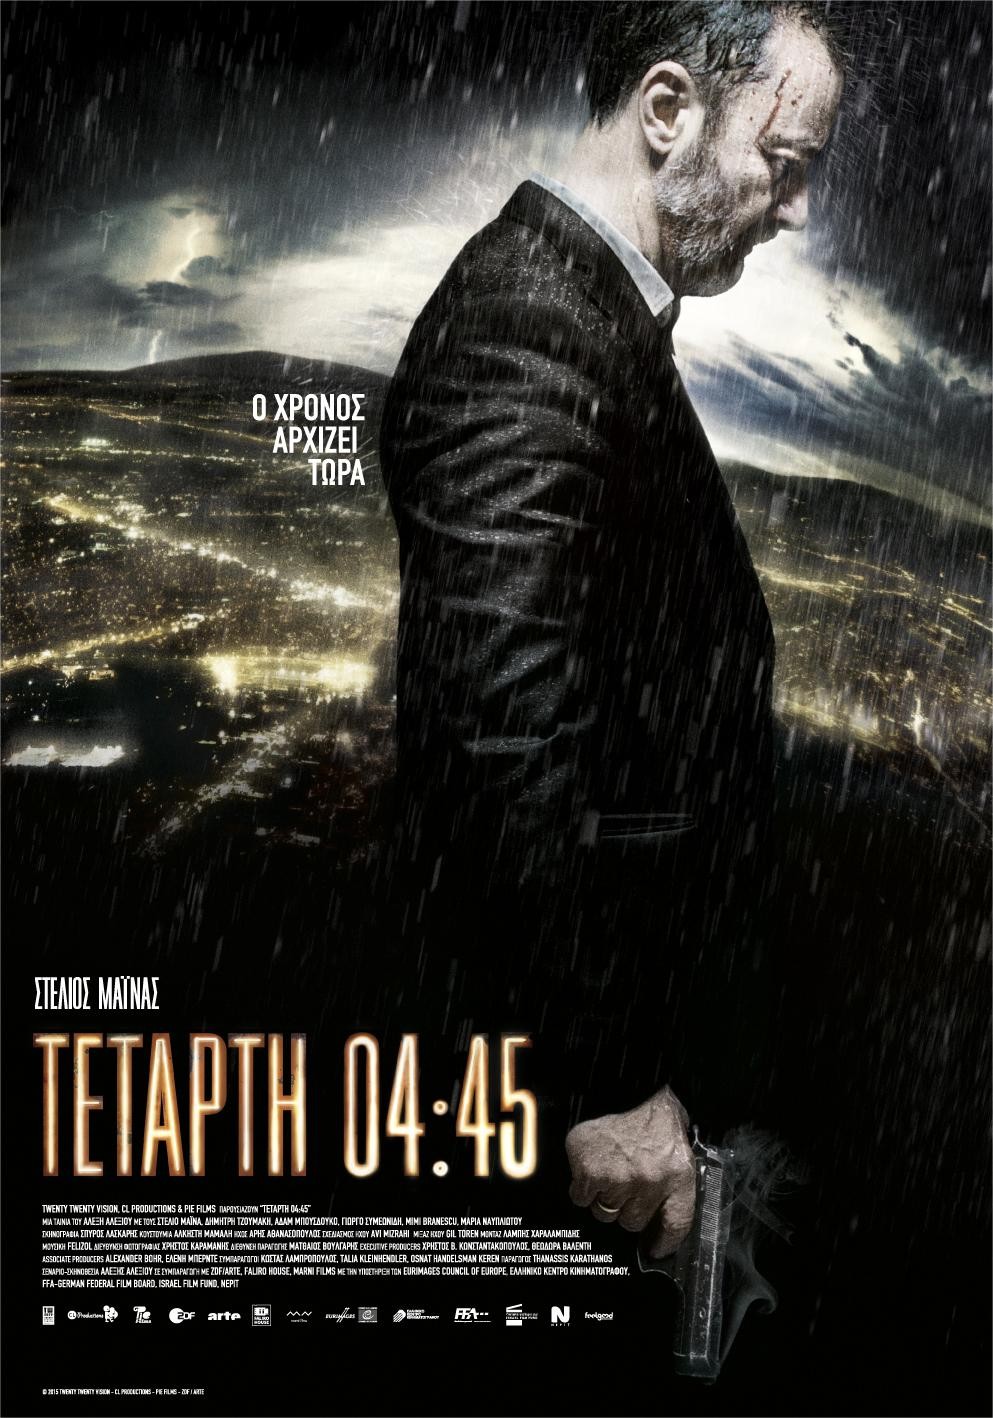 Extra Large Movie Poster Image for Tetarti 04:45 (#1 of 3)